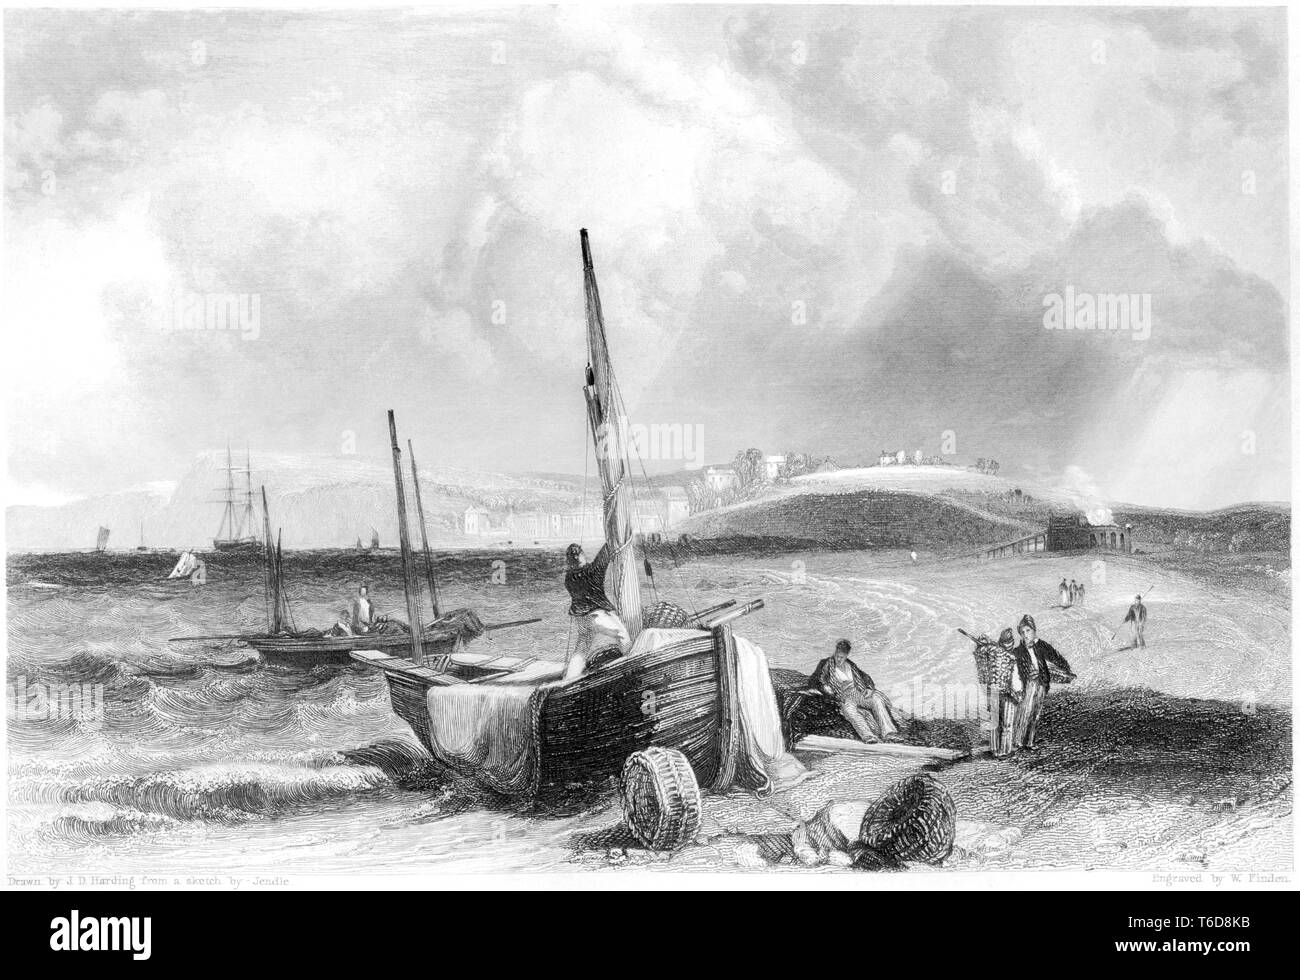 An engraving of Budleigh Salterton scanned at high resolution from a book published in 1842. Believed copyright free. Stock Photo